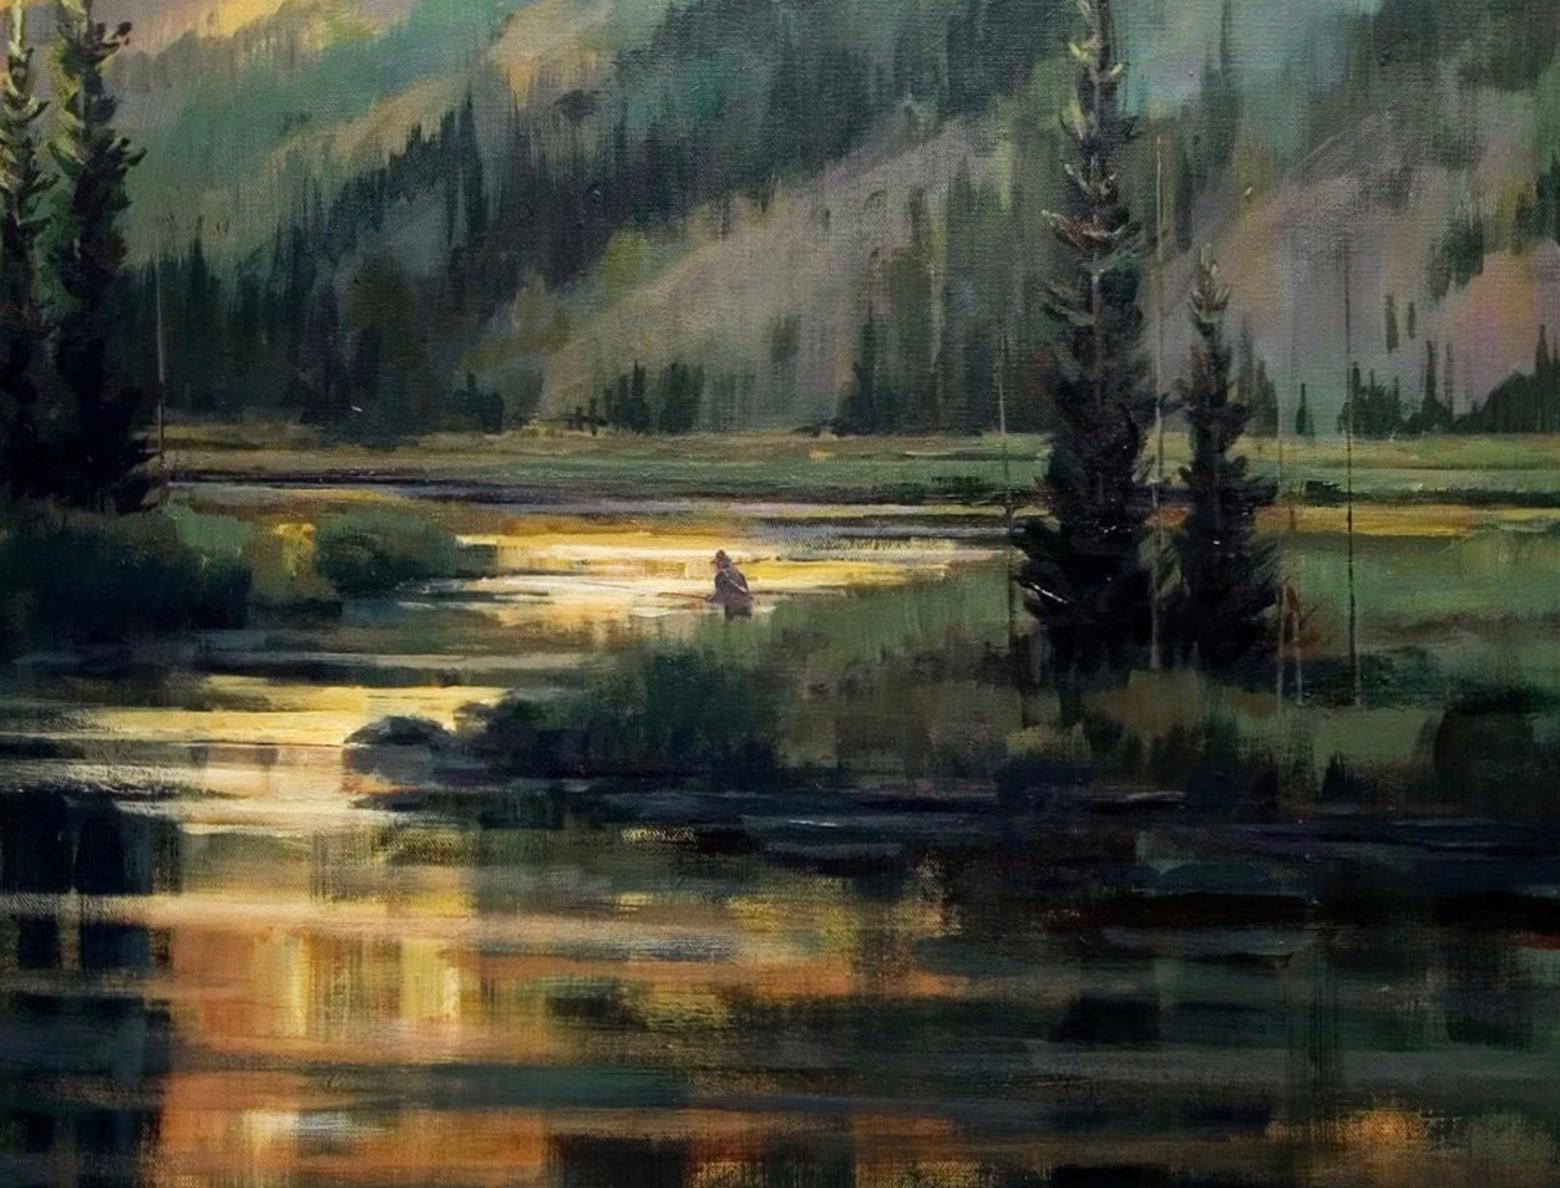 Are wild place still "wild" is wildlife are displaced from their homes by people?  Painter Rod Crossman, one of the finest sporting artists in America, has long pondered the question. He believes that places vacant of wildlife lose part of their soul.  To see more of Crossman's amazing work go to  rodcrossman.com